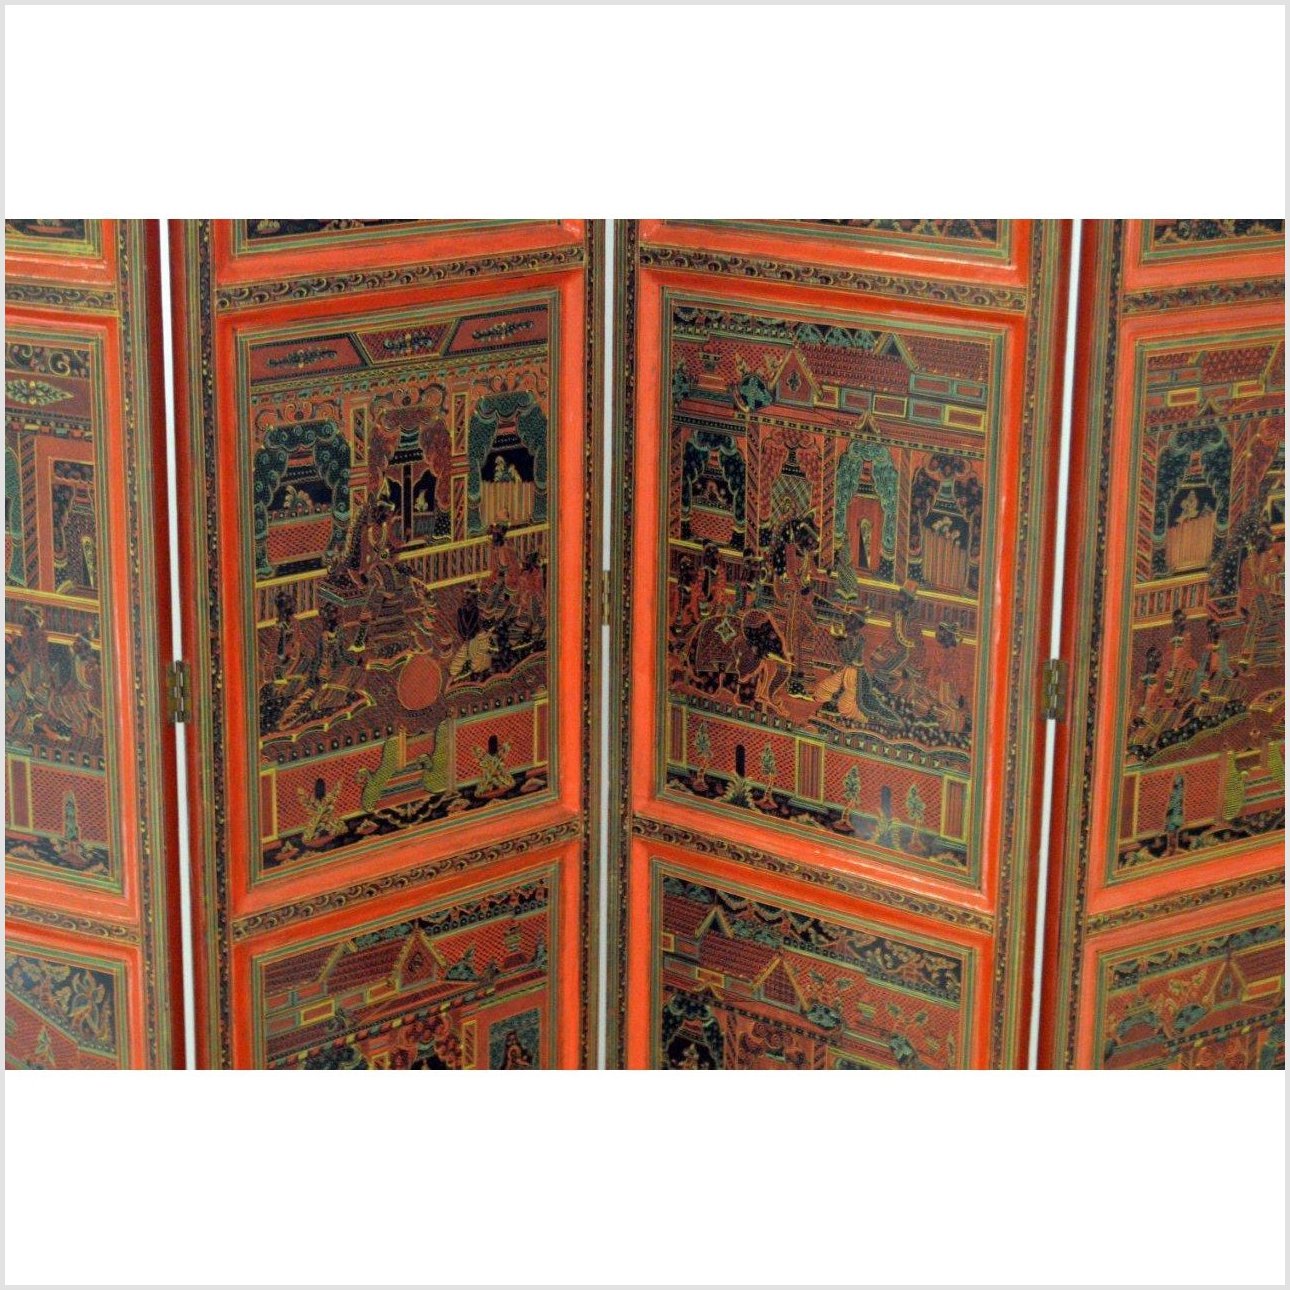 4-Panel Middle Eastern Art Inspired Screen-YN2844-5. Asian & Chinese Furniture, Art, Antiques, Vintage Home Décor for sale at FEA Home